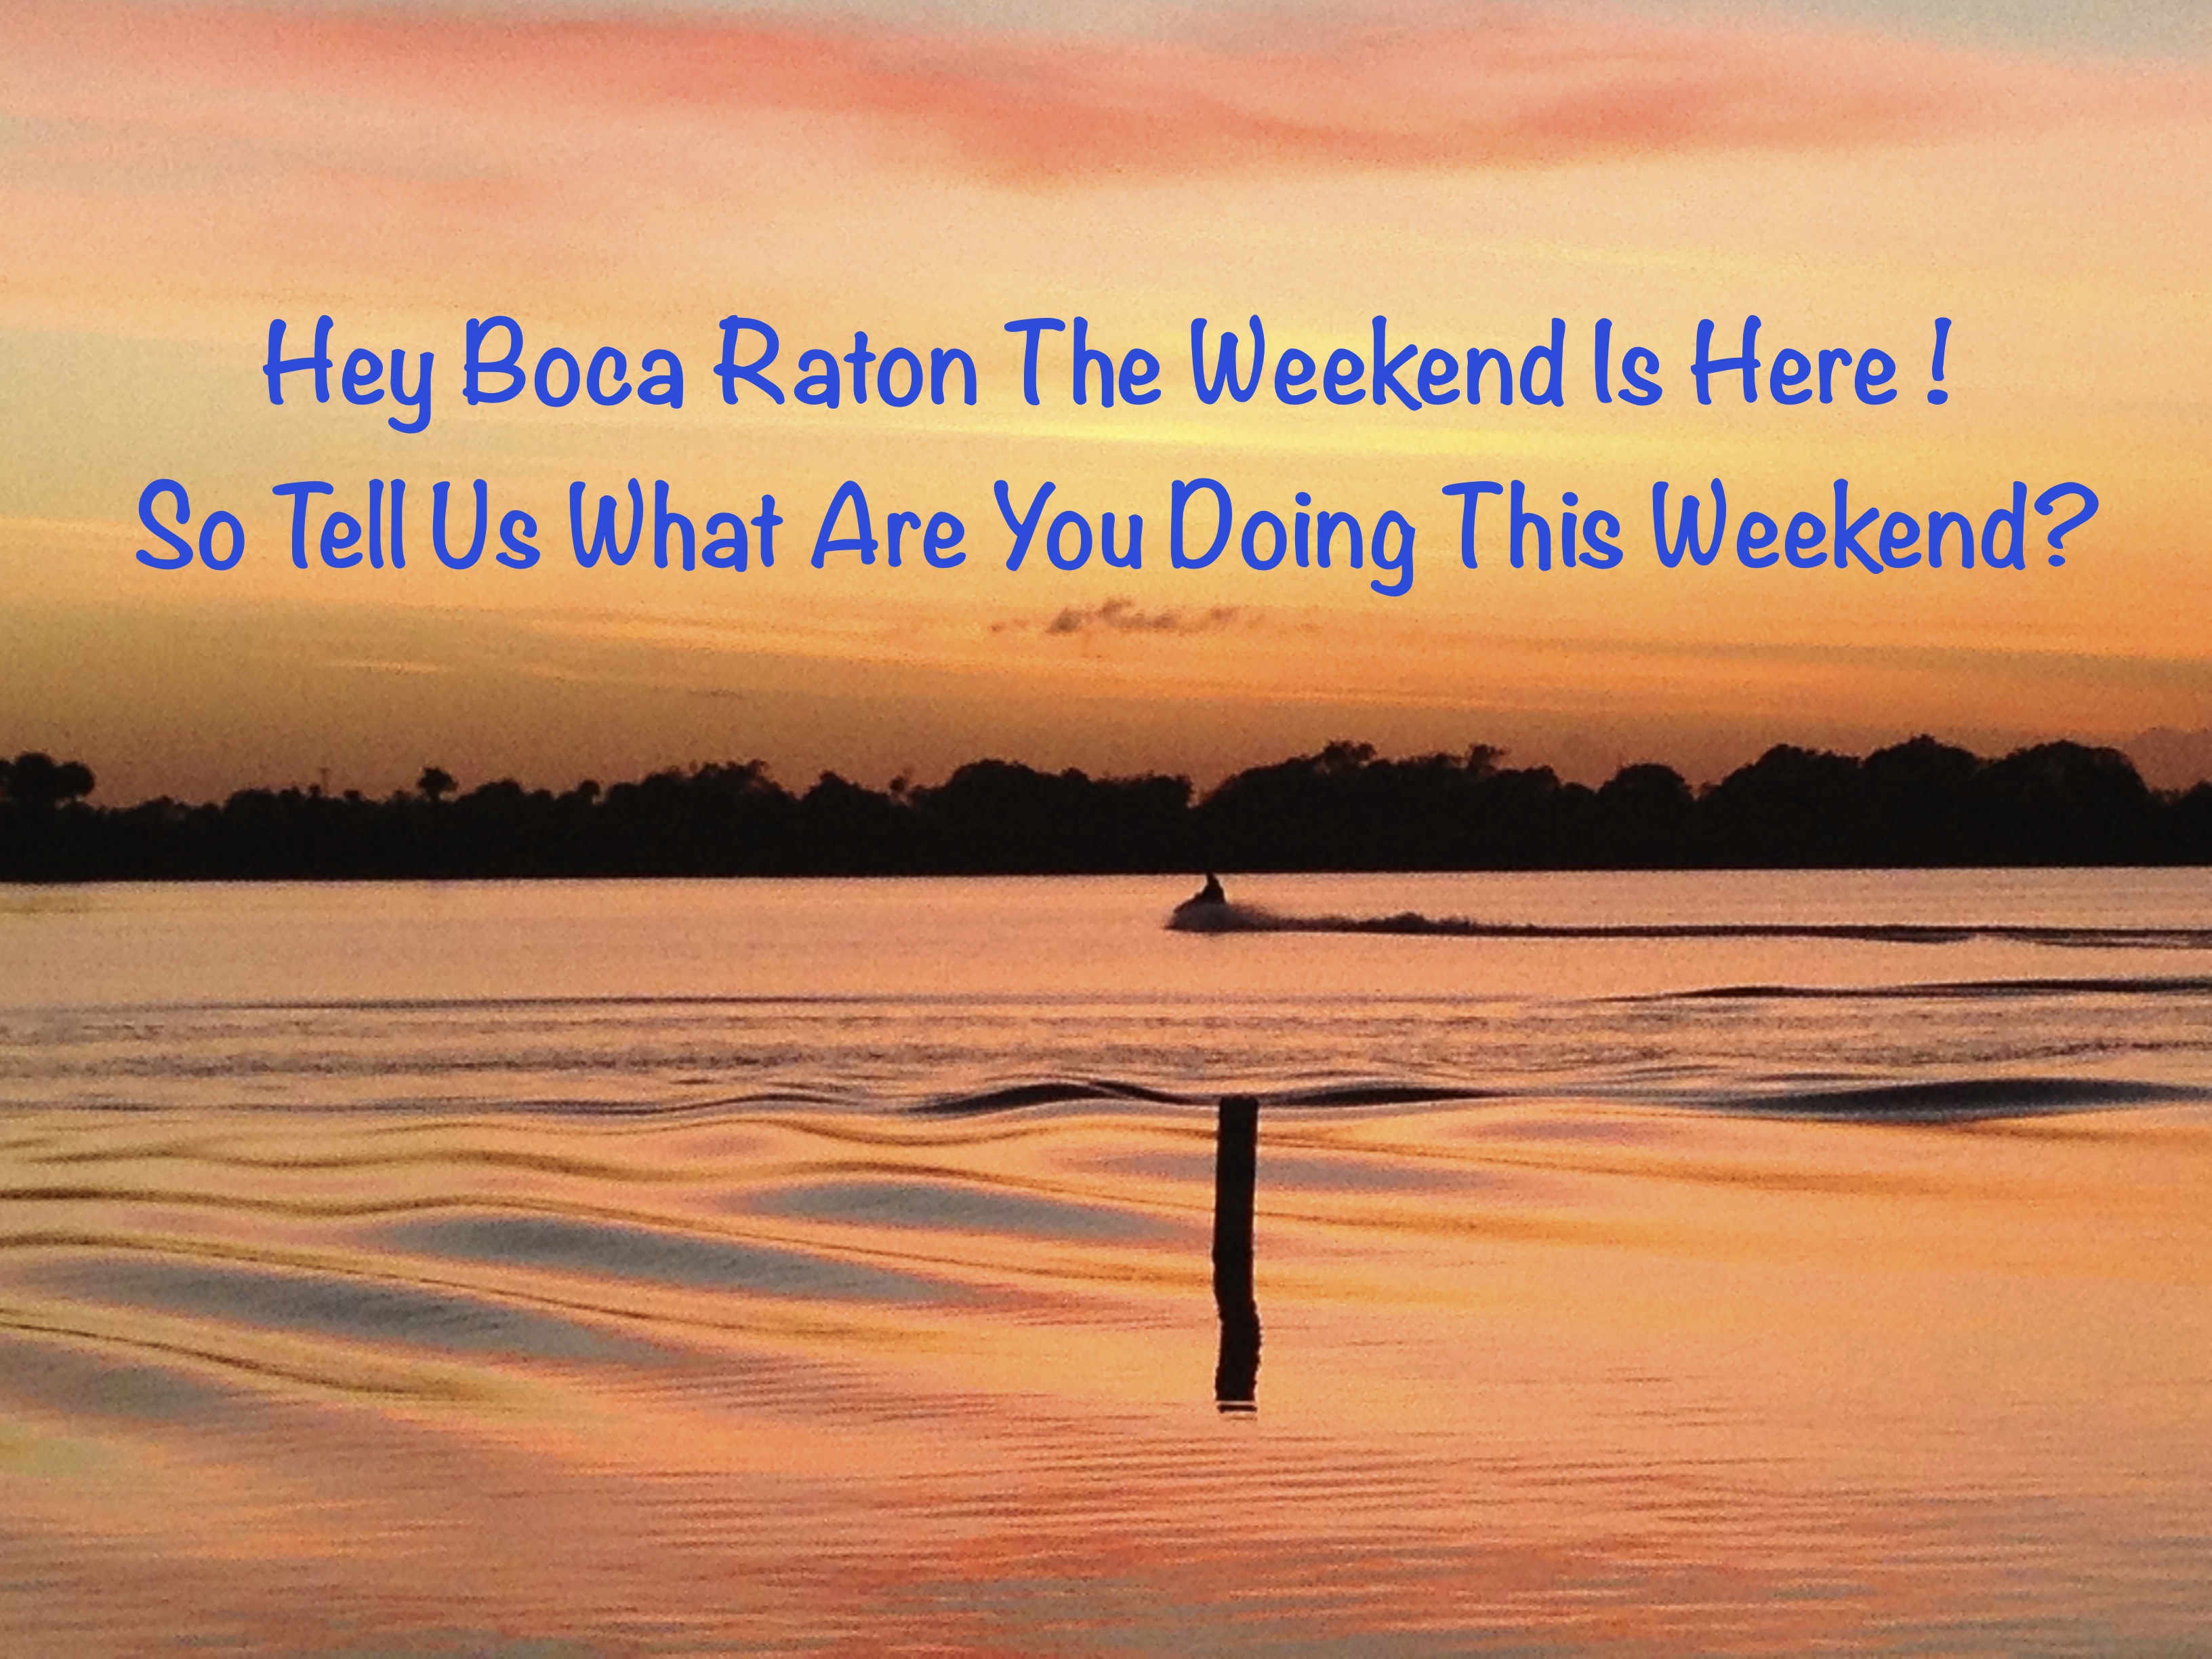 Hey Boca Raton The Weekend Is Here! So Tell Us What Are You Doing This Weekend? Photo ...3264 x 2448